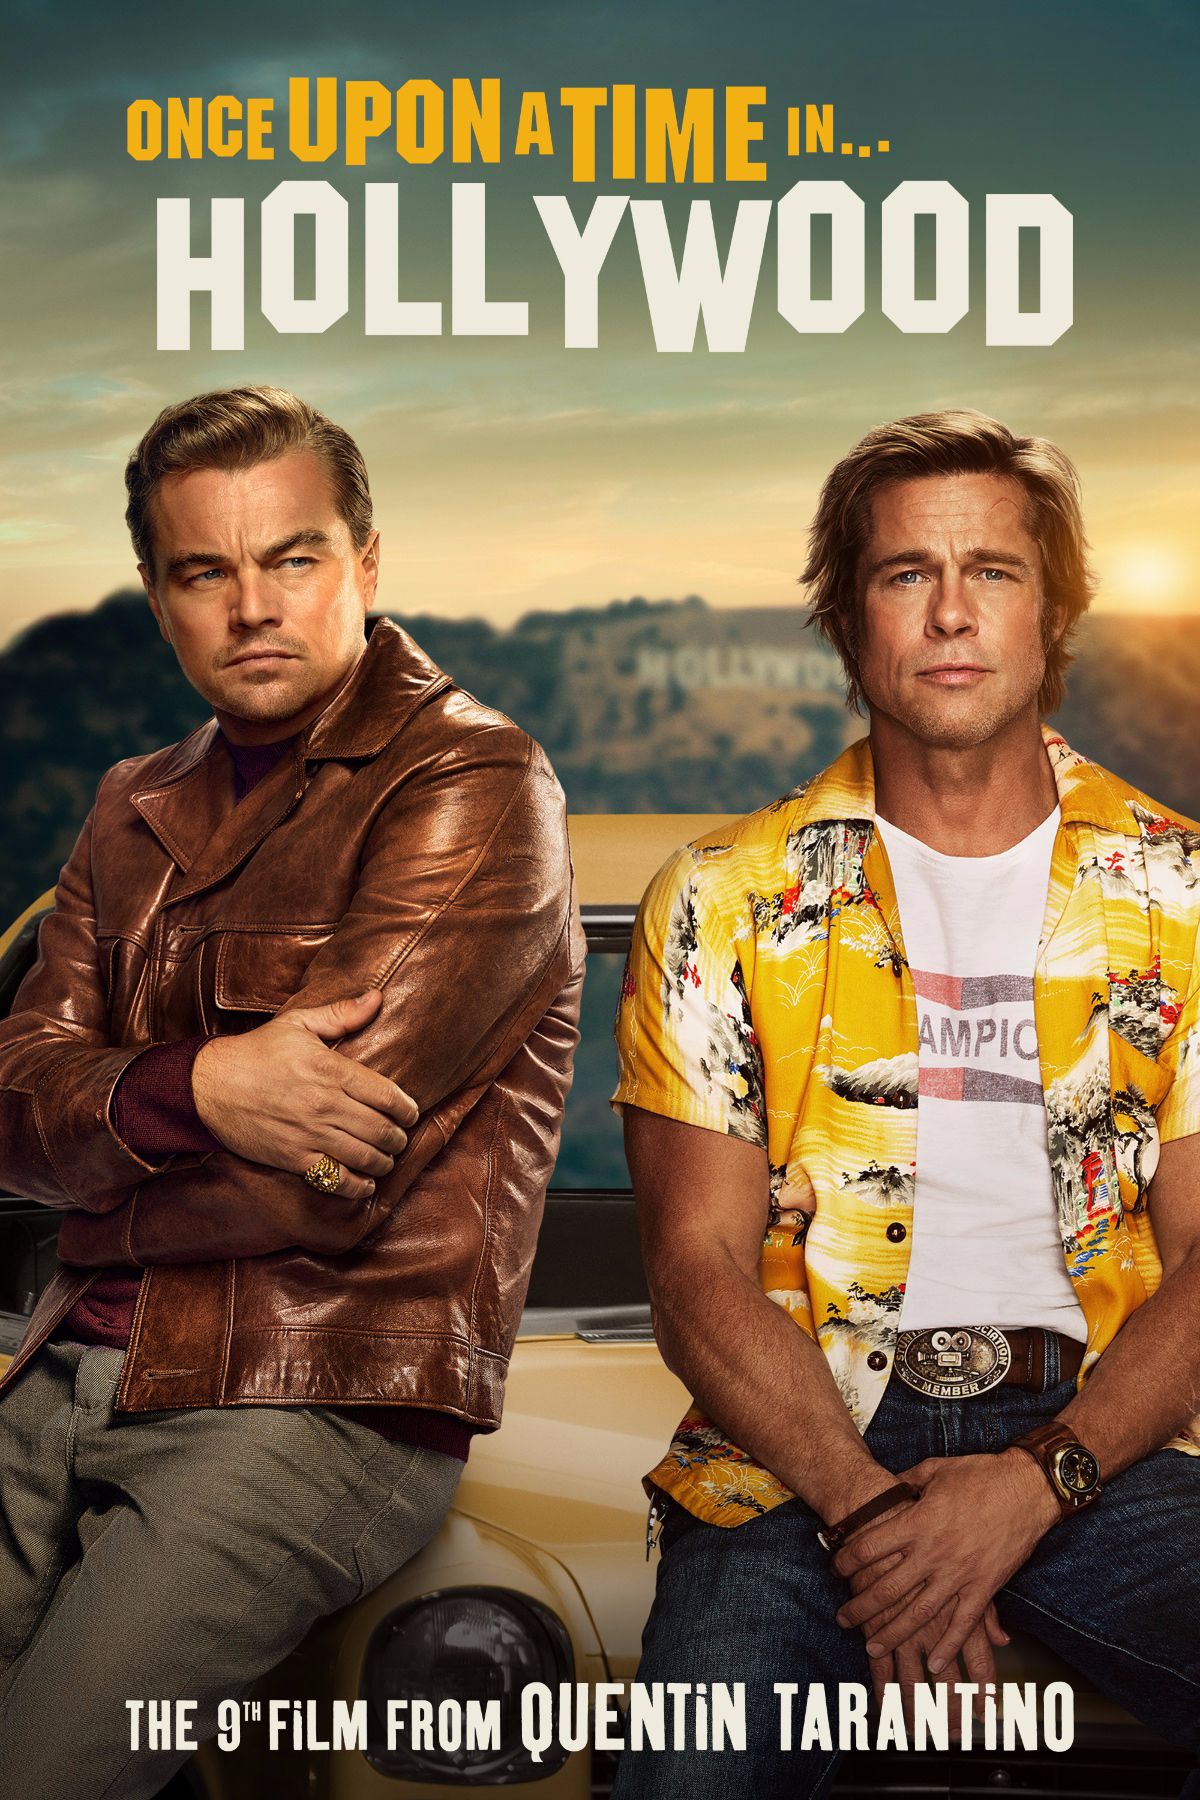 Once Upon a Time in Hollywood Blu-ray and DVD art